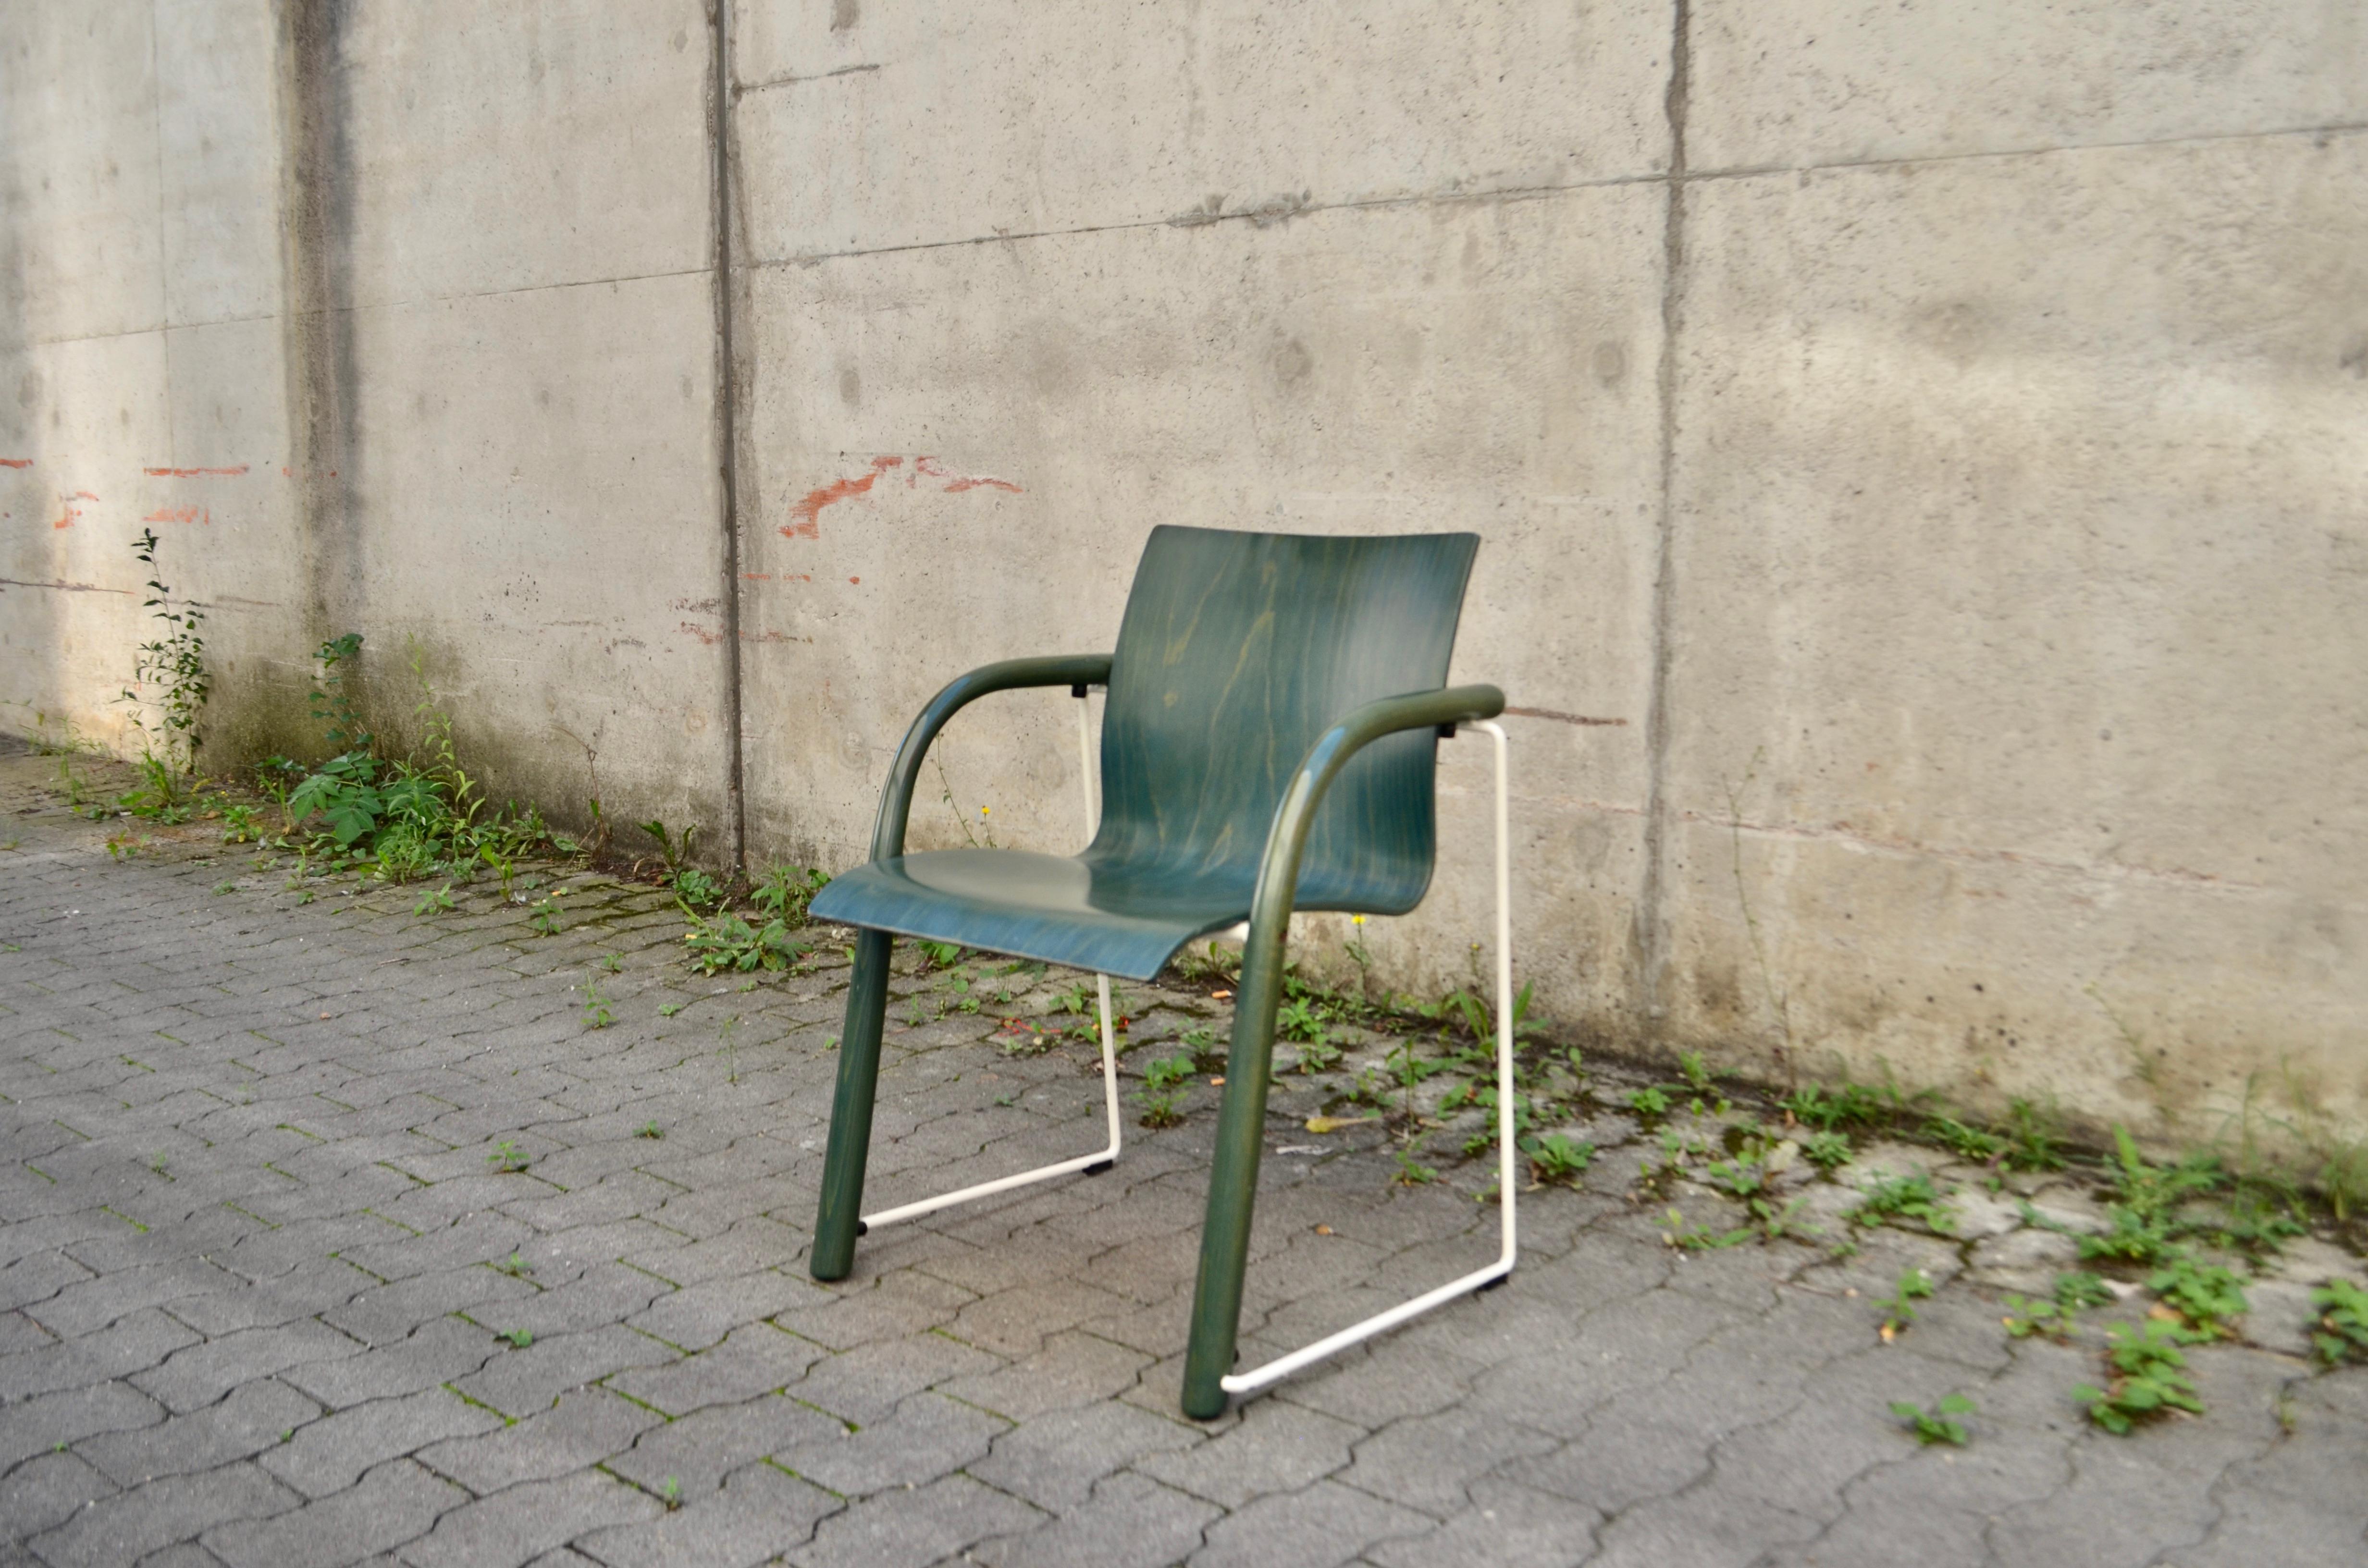 This Thonet Chair Model S320  in green version.
Rare Colour.
Designed by Ulrich Boehme & Wulf Schneider.

